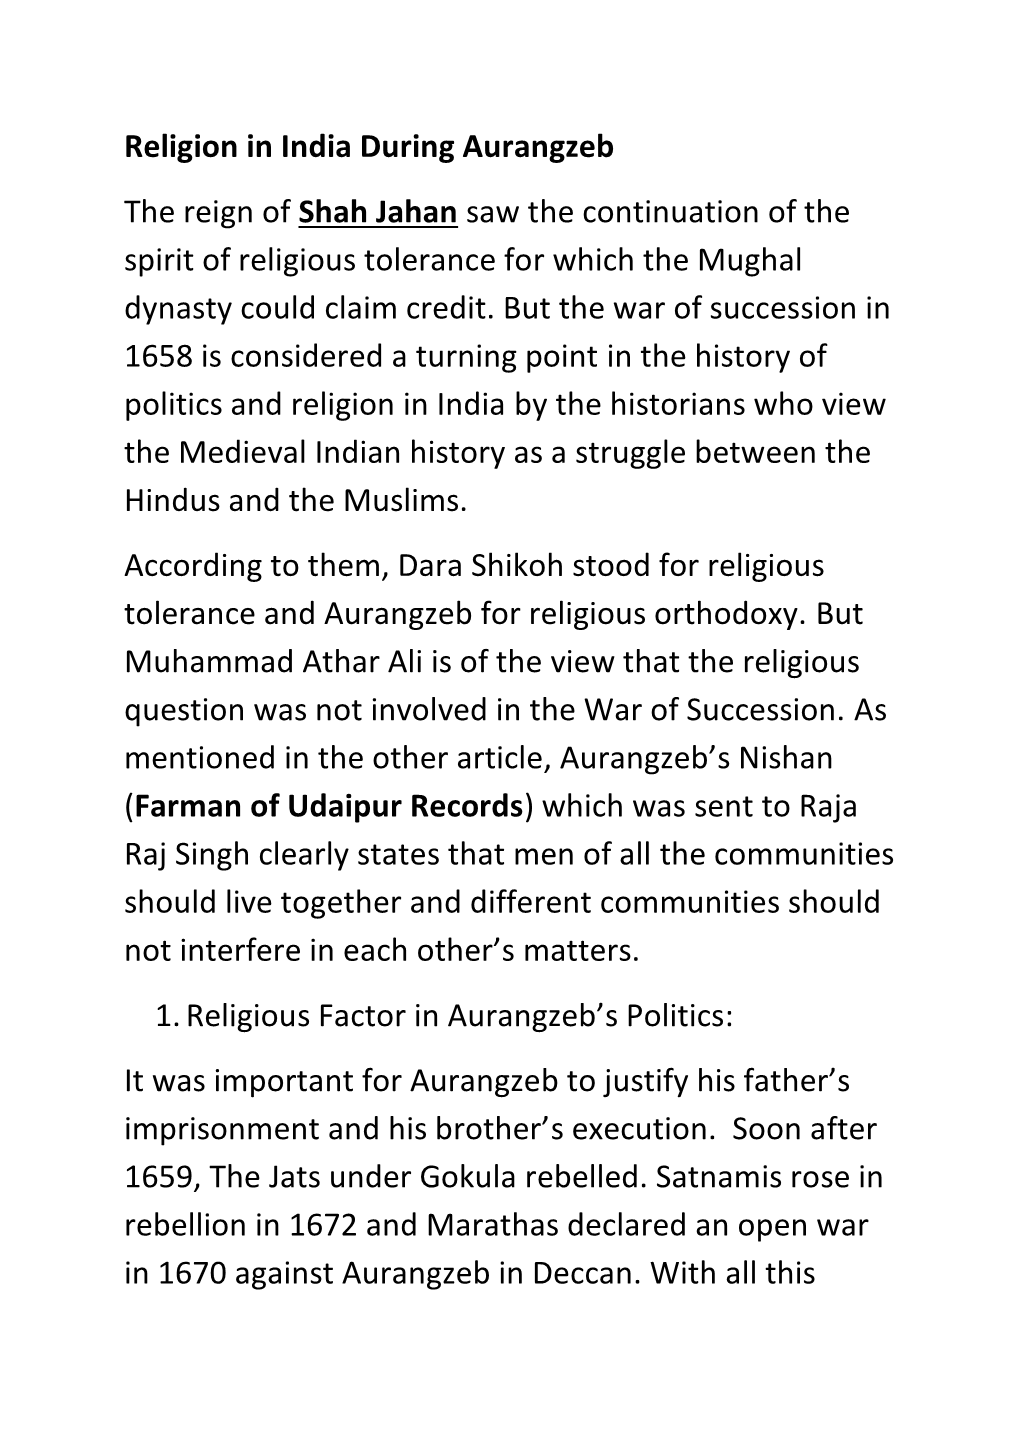 Religion in India During Aurangzeb the Reign of Shah Jahan Saw the Continuation of the Spirit of Religious Tolerance for Which the Mughal Dynasty Could Claim Credit